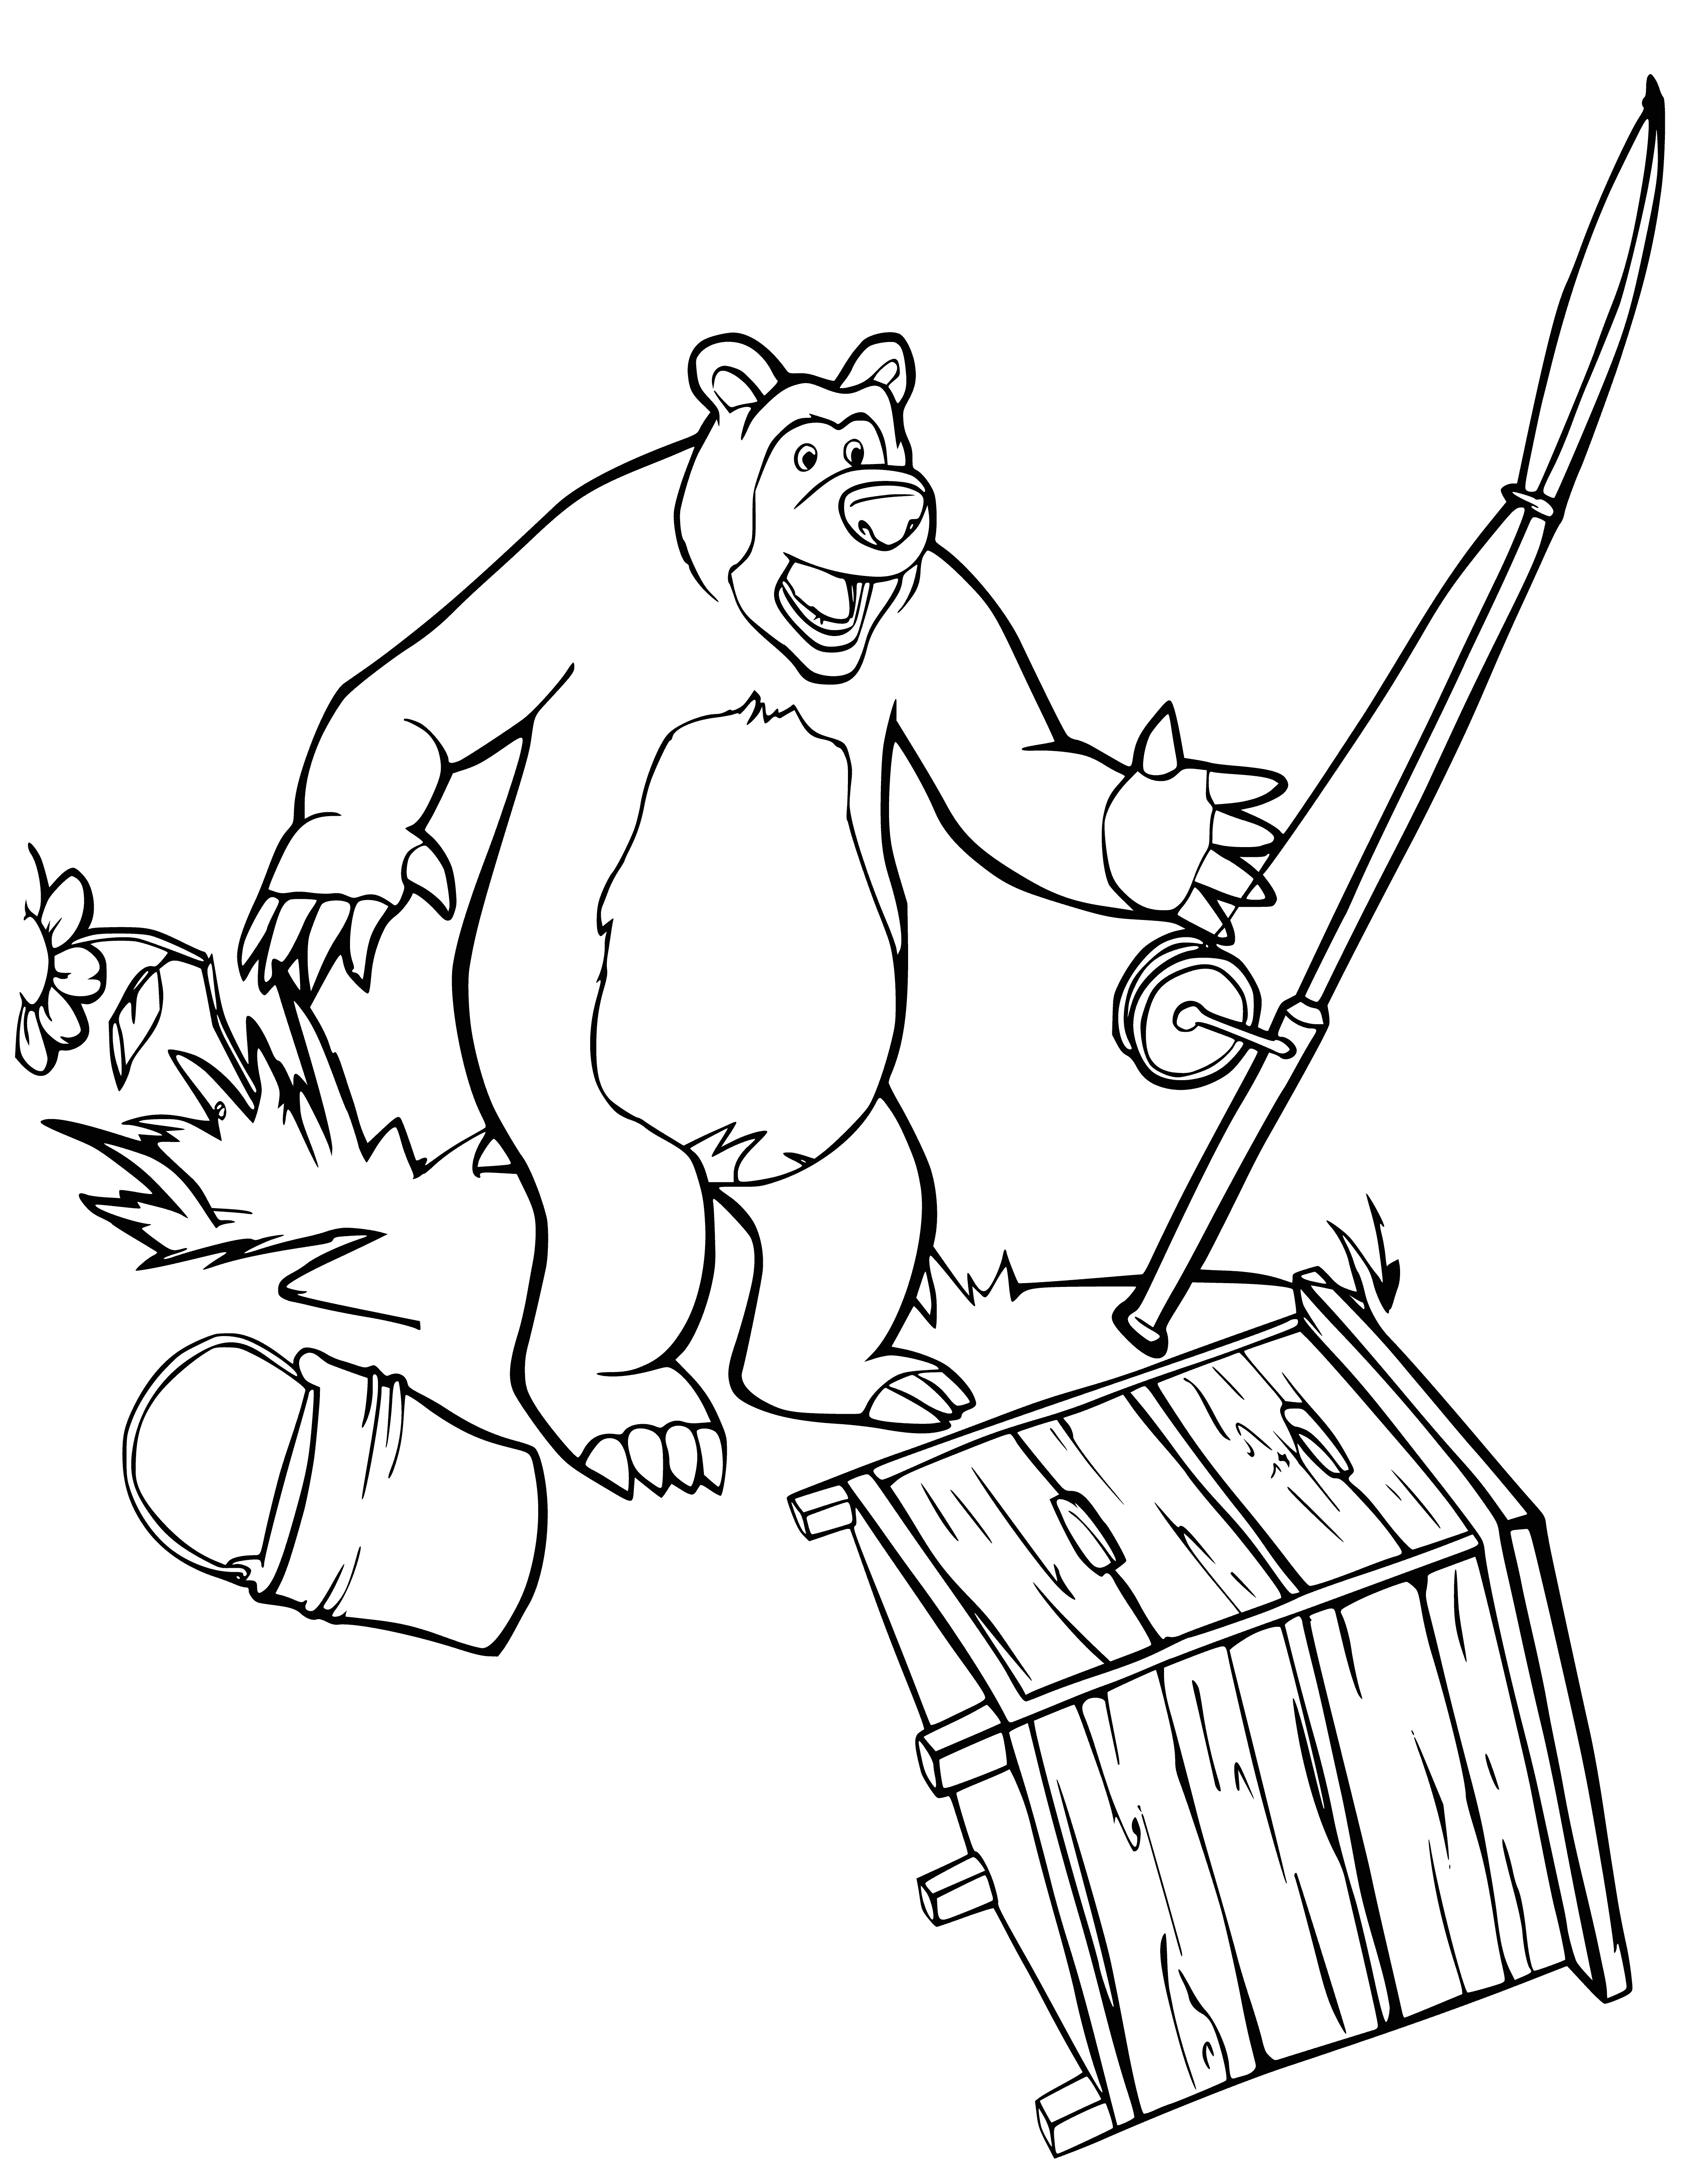 coloring page: Happy bear stands on dock, fishing pole in hand. Wears red and white striped shirt, looks content. #bearlife